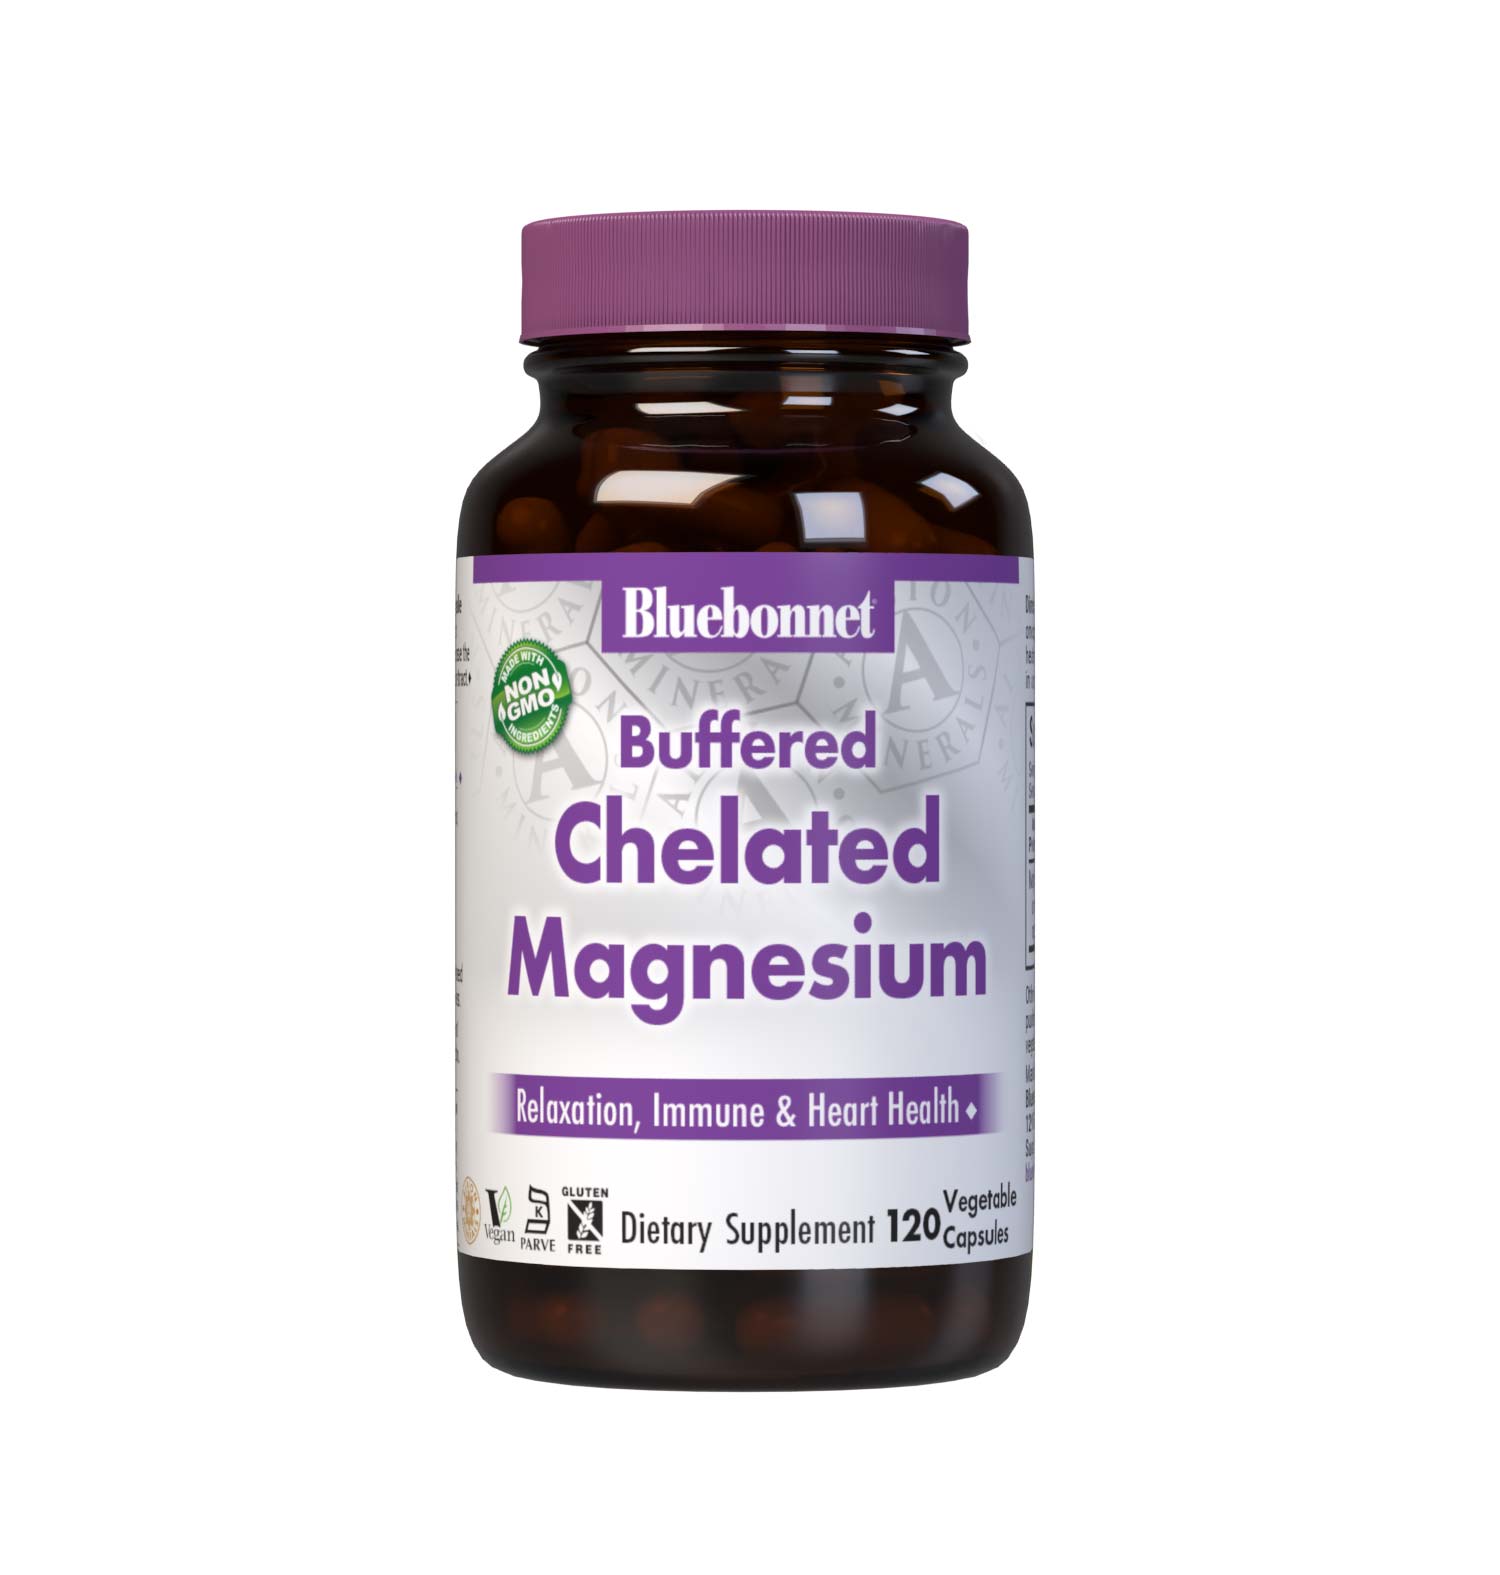 Bluebonnet's Buffered Chelated Magnesium 120 Vegetable Capsules are formulated with chelated magnesium bisglycinate buffered with magnesium oxide to increase the pH (alkalinity) to make it gentle on the digestive tract. #size_120 count